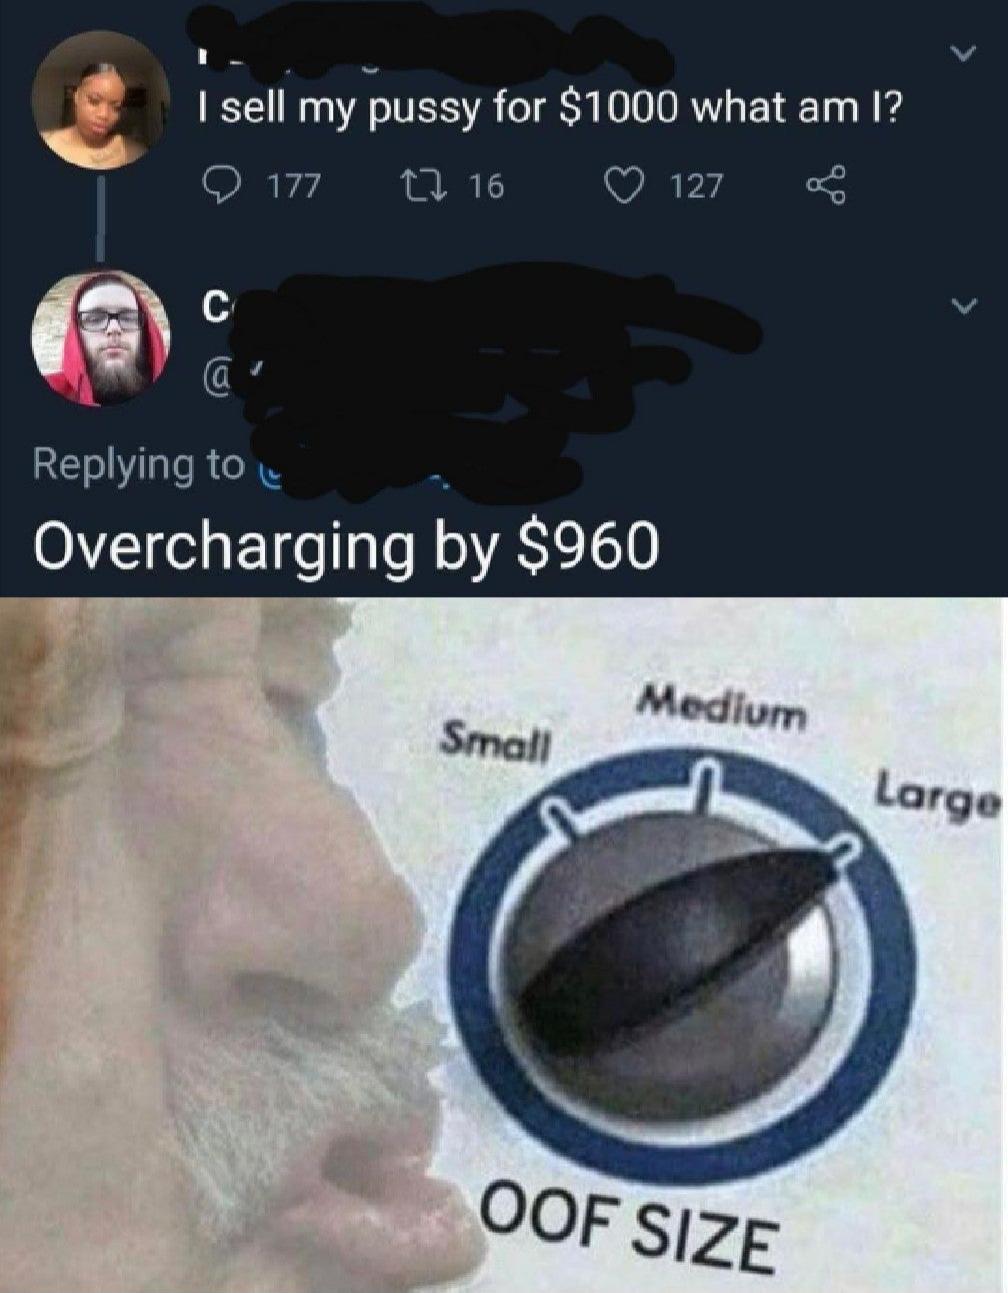 oof size meme - I sell my pussy for $1000 what am I? 177 27 16 127 8 Overcharging by $960 Medium Small Large Oof Size